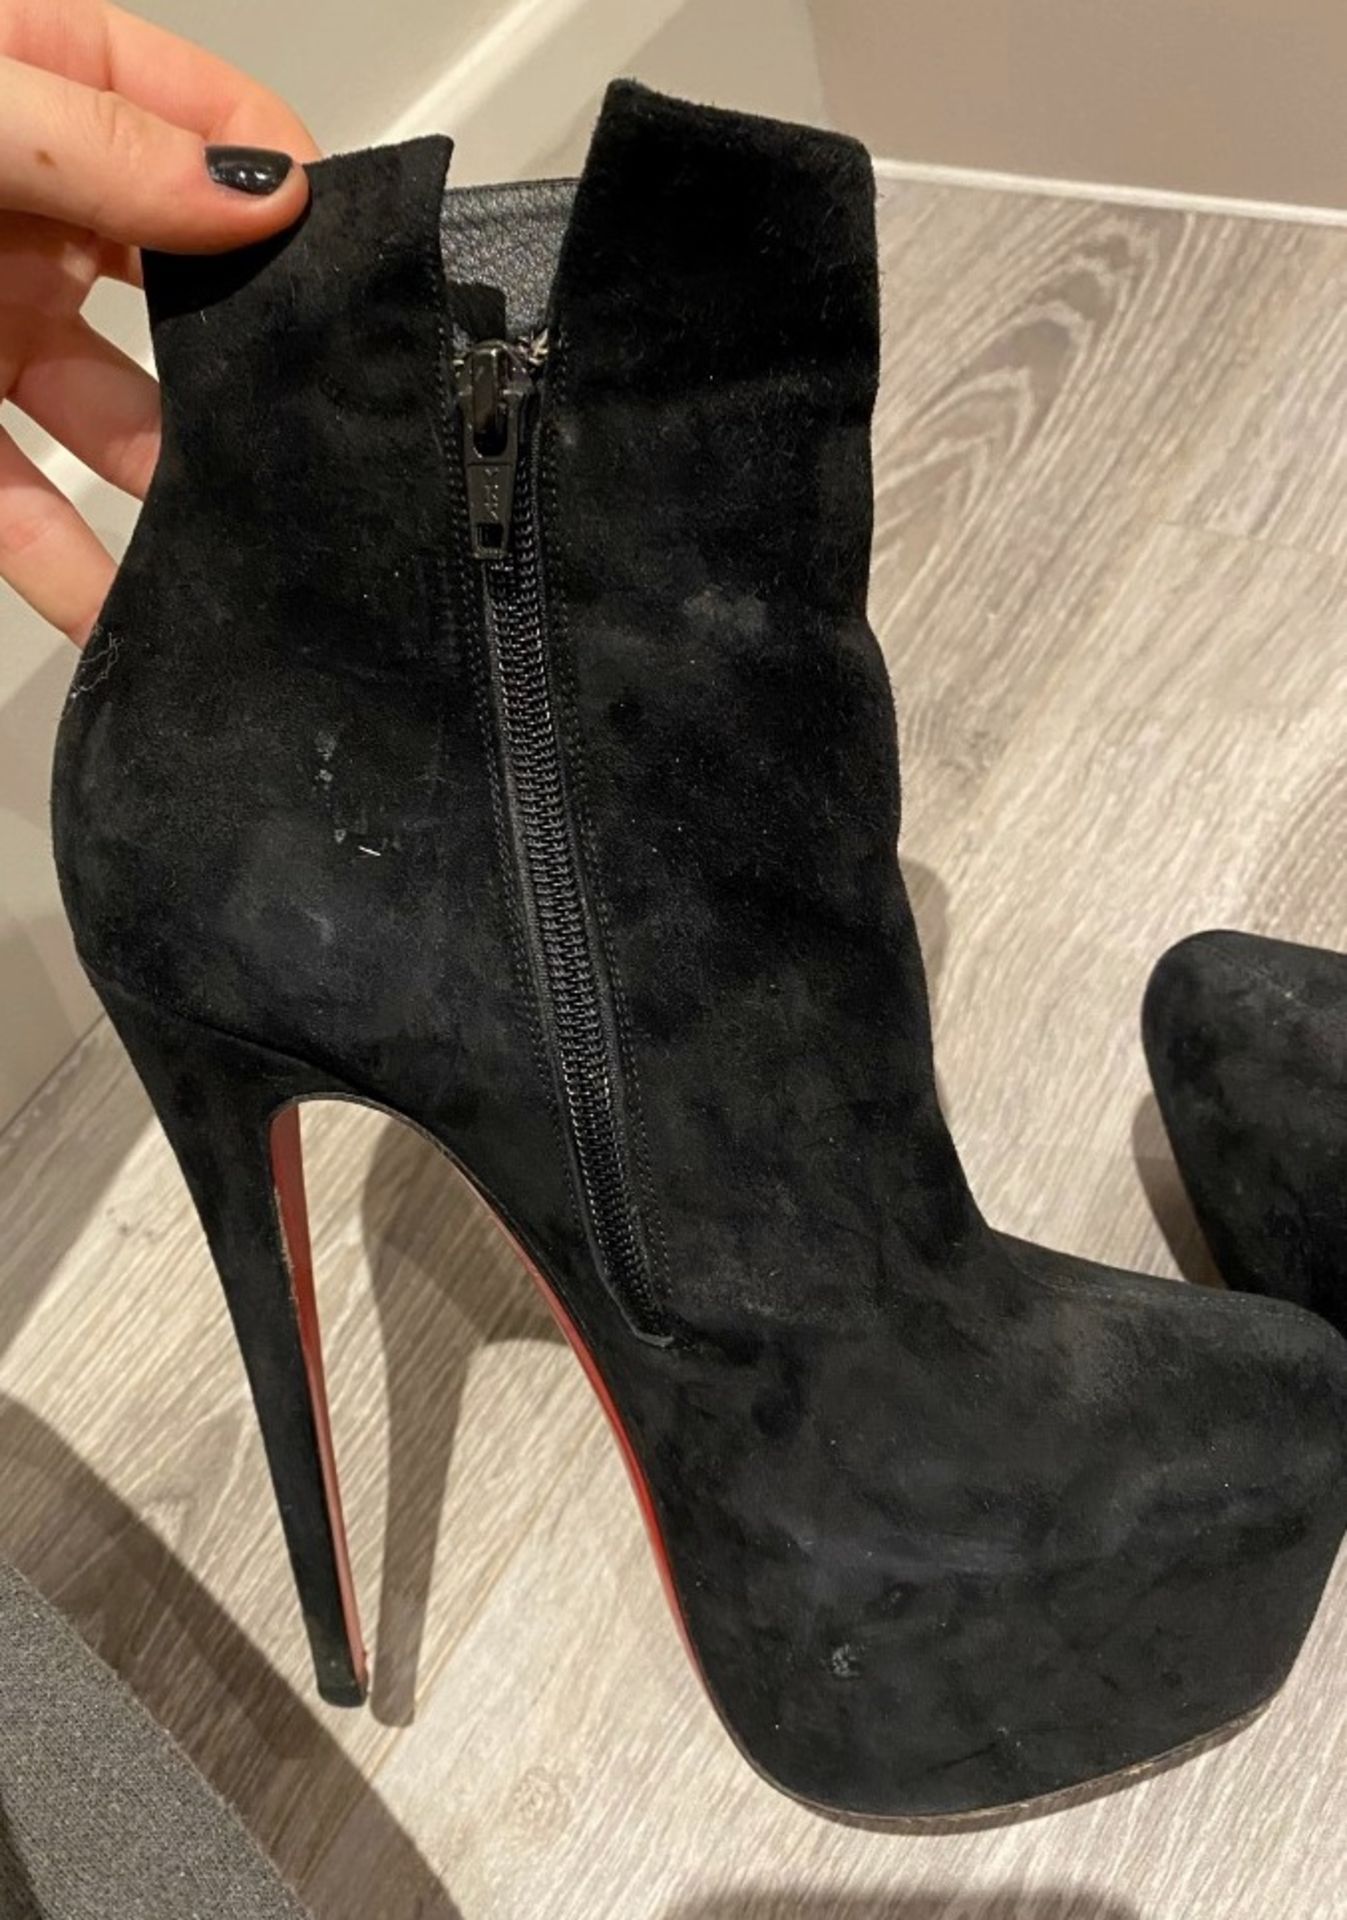 1 x Pair Of Genuine Christain Louboutin Boots In Black - Size: 36.5 - Preowned in Good Condition - R - Image 4 of 4